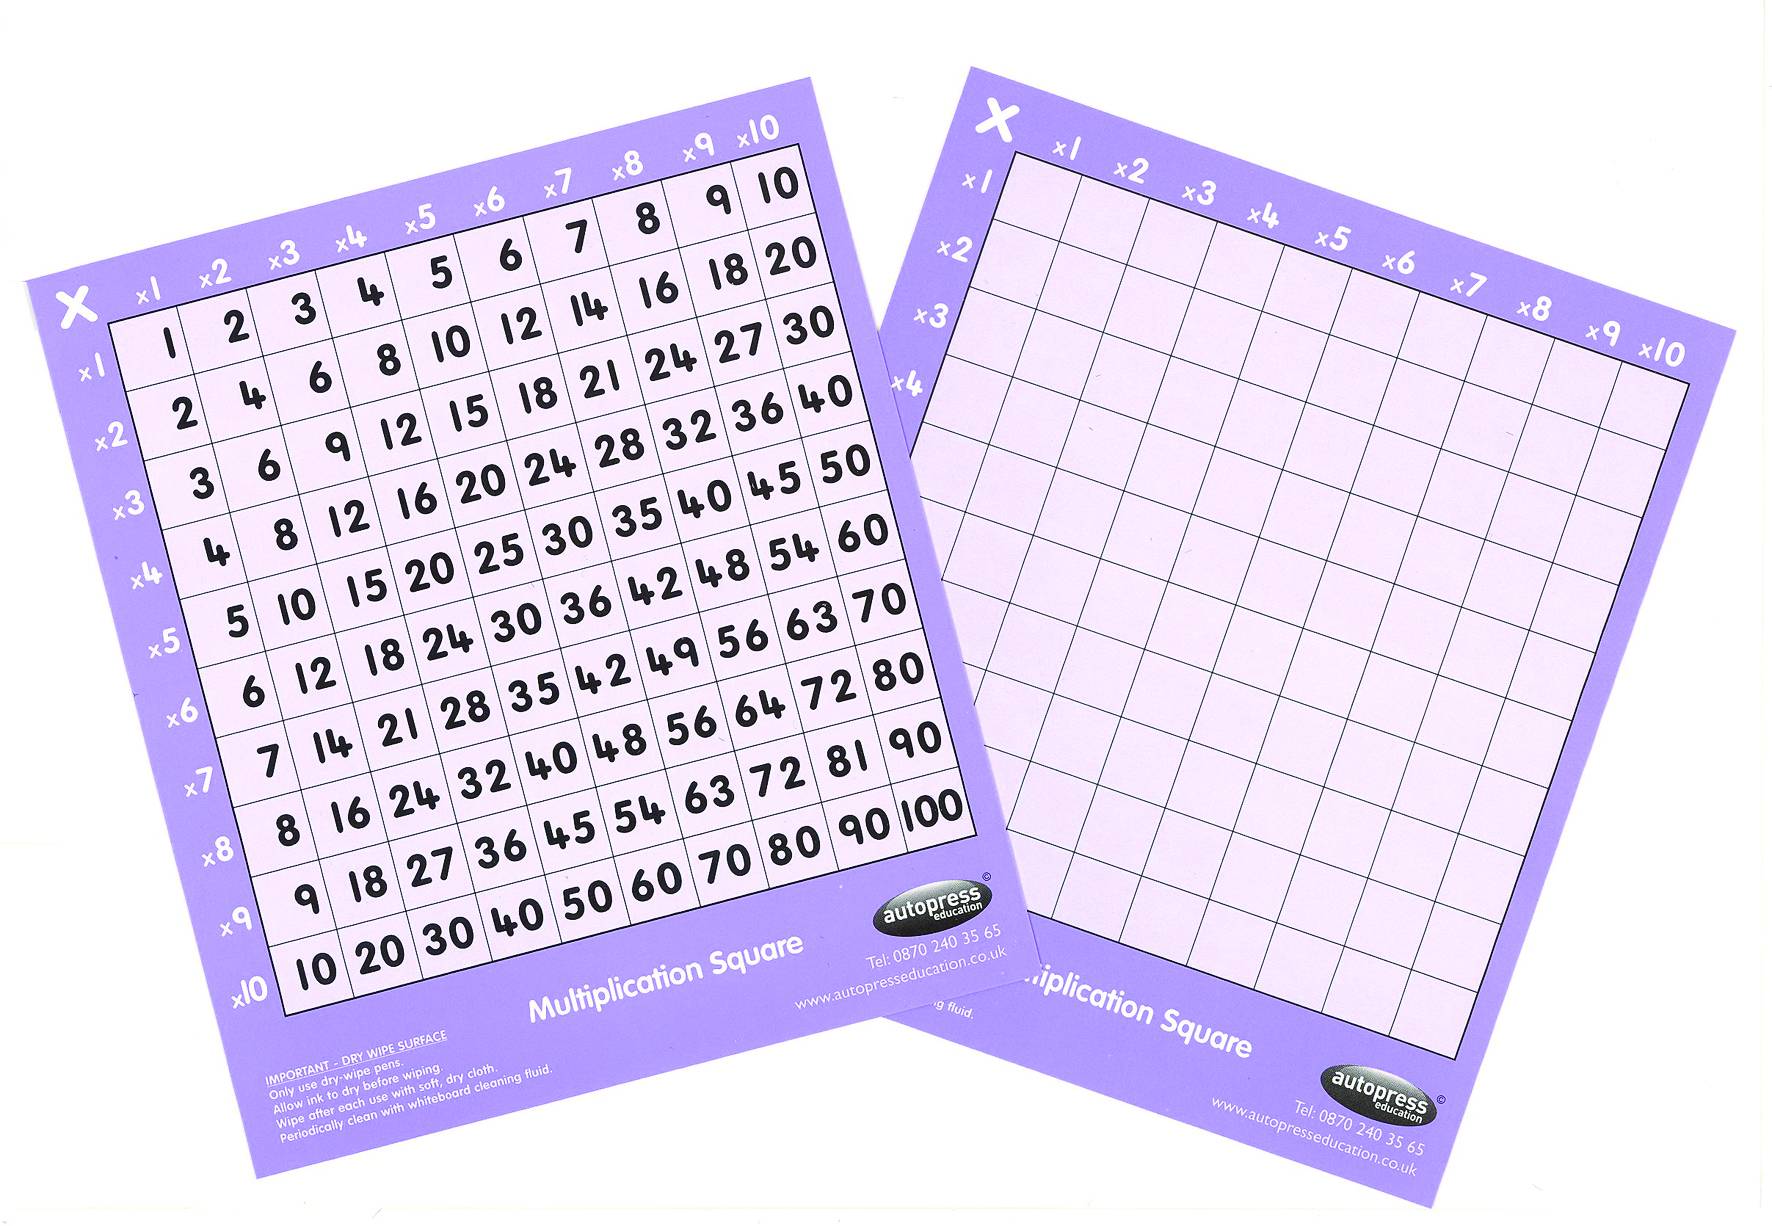 CHILD'S MULTIPLICATION SQUARE - SMALL